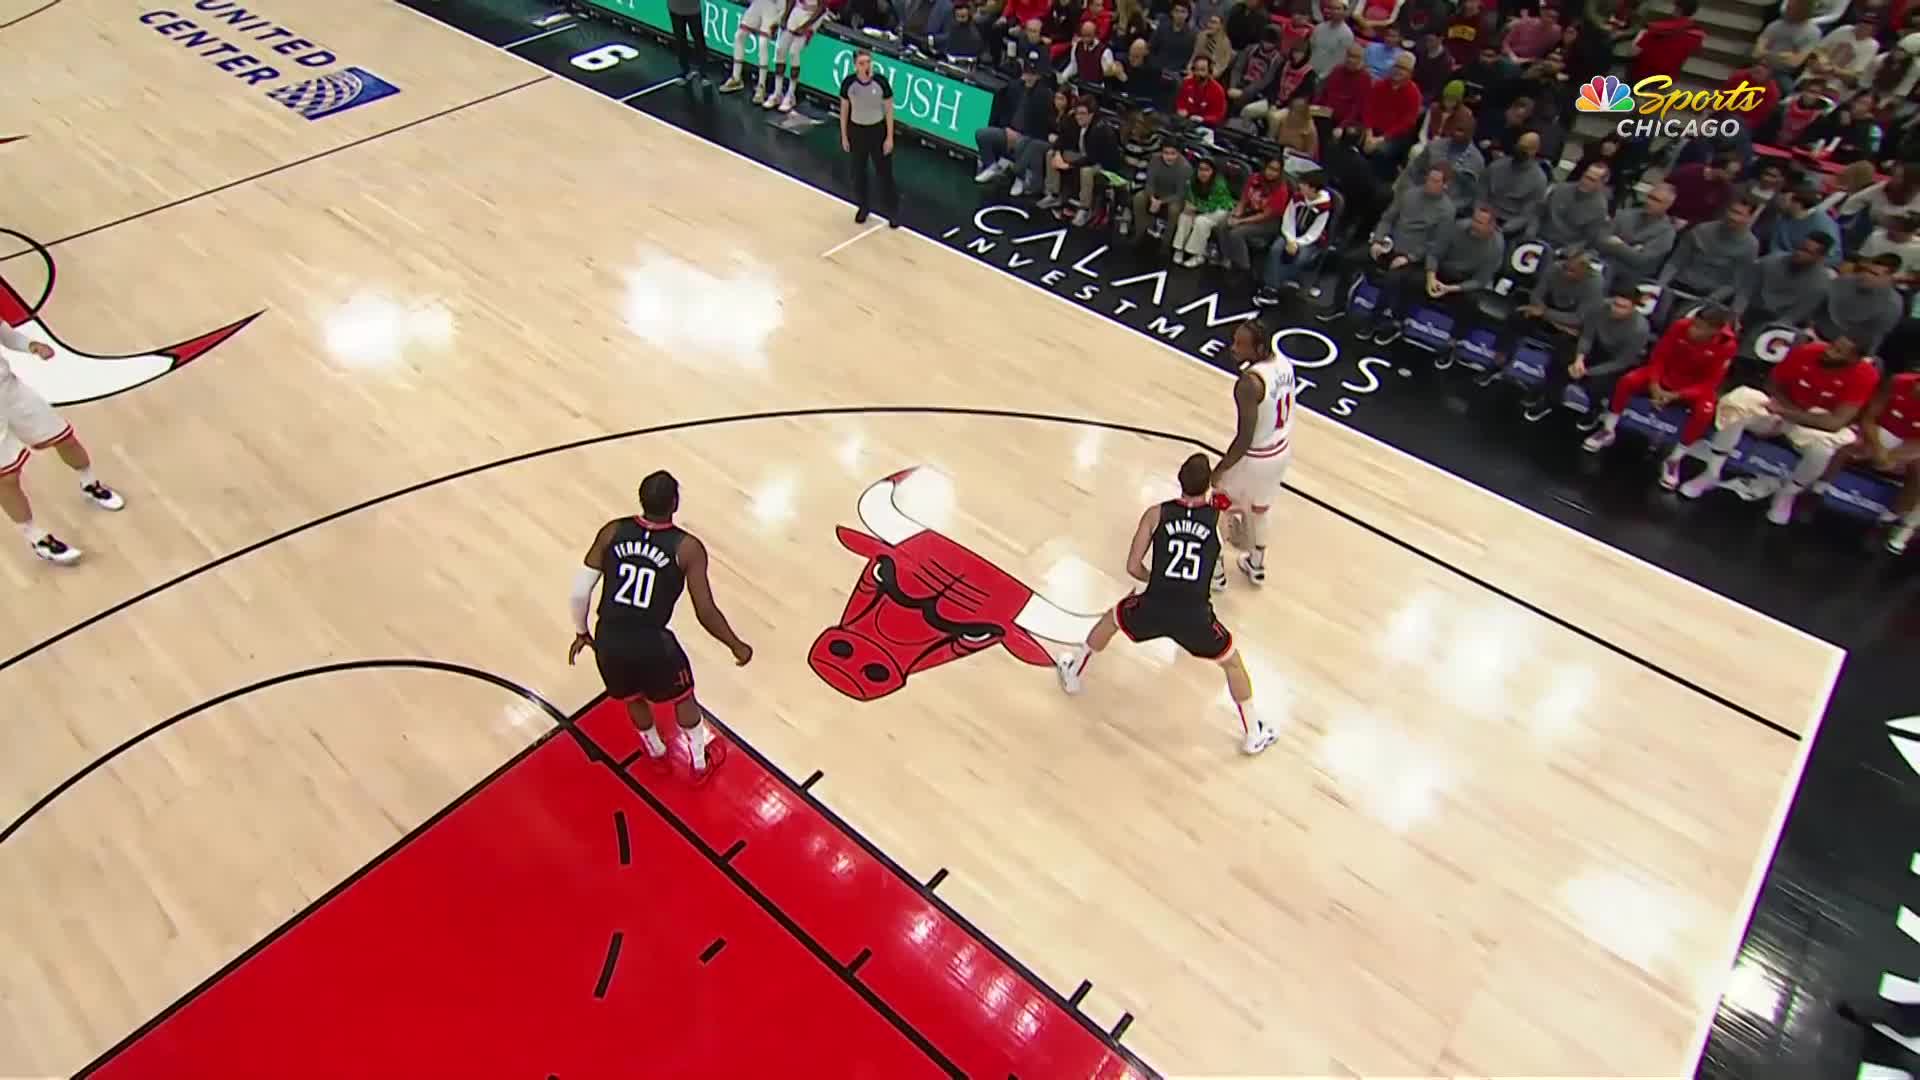 Top plays from Chicago Bulls vs